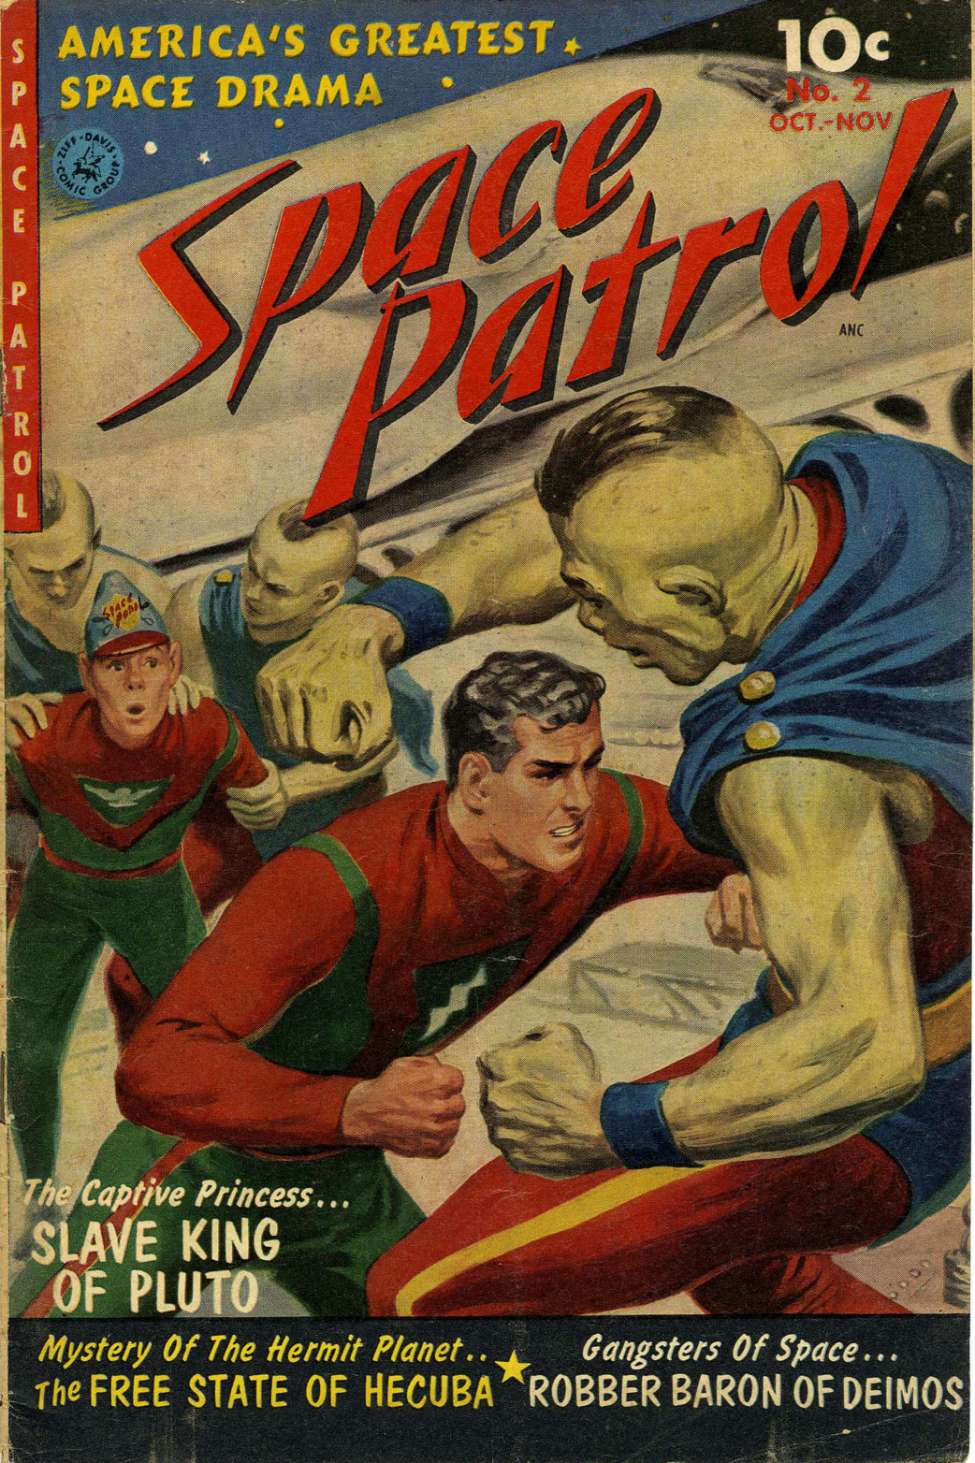 Book Cover For Space Patrol 2